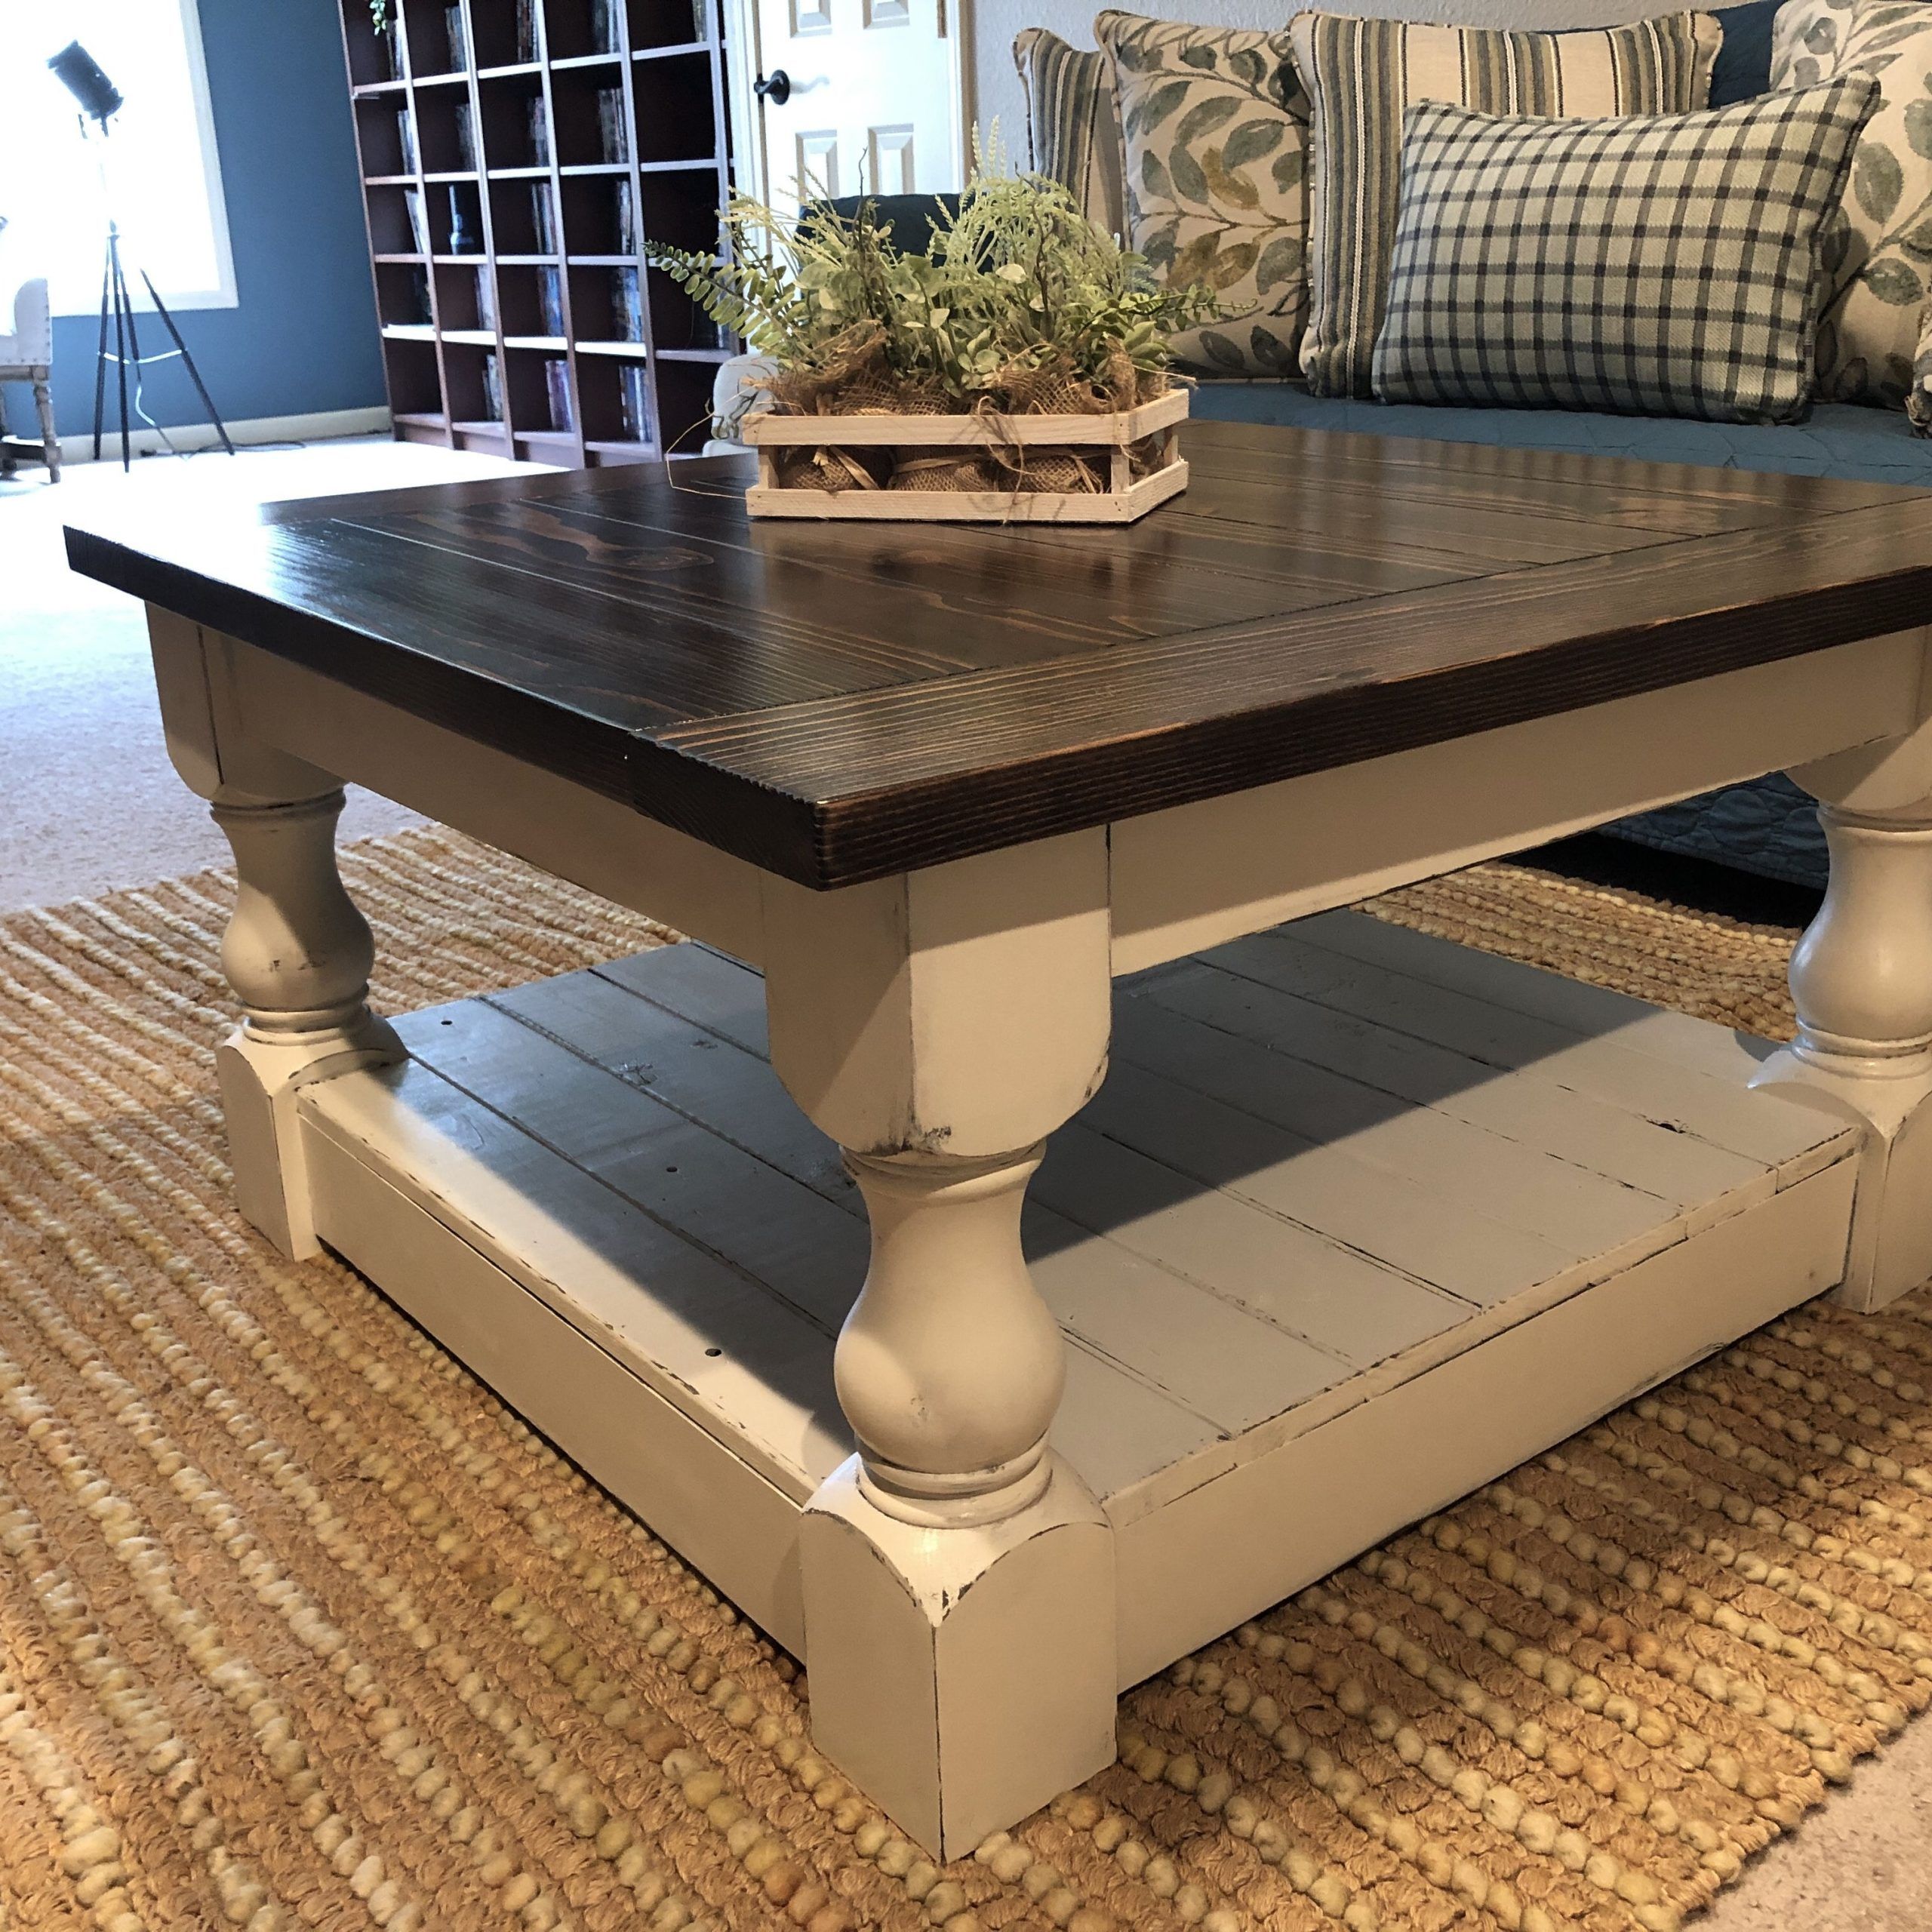 Rustic Square Coffee Tables: An Ideal Choice For Any Room – Coffee Throughout Transitional Square Coffee Tables (View 16 of 20)